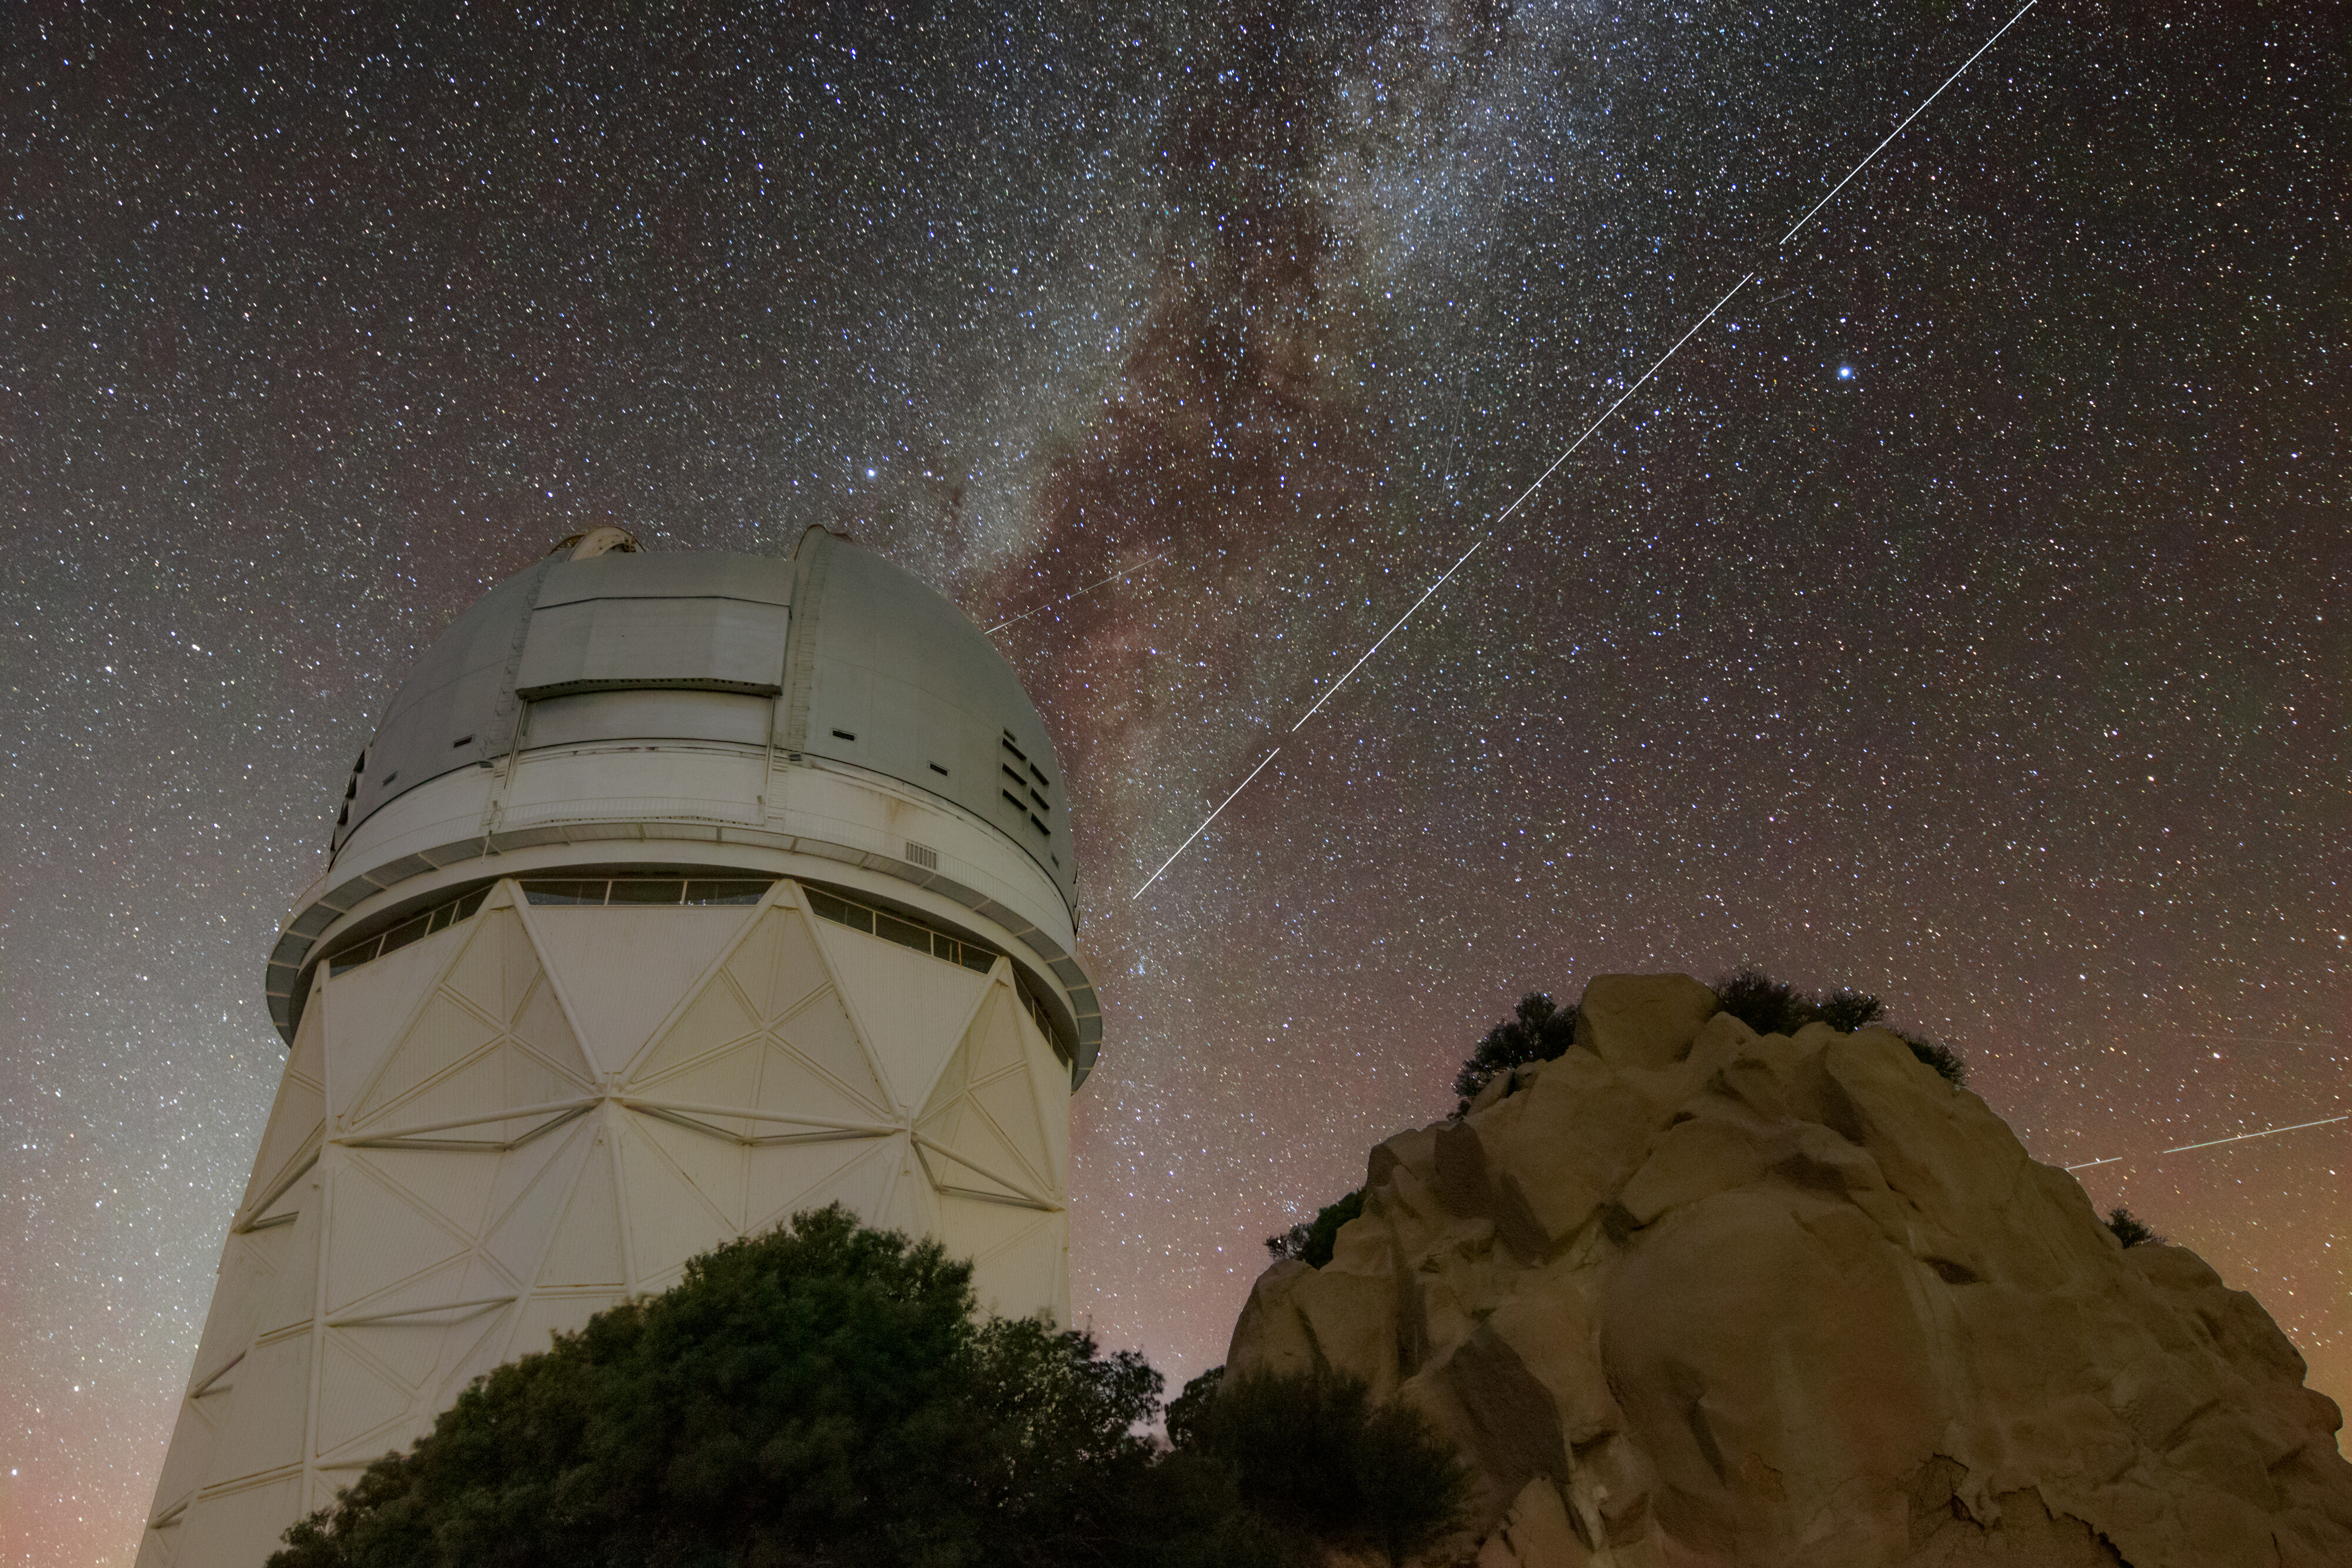 Foreground: Nicholas U. Mayall 4-meter Telescope at Kitt Peak National Observatory in Arizona. Background: the night sky with the Milky Way stretching across the center of the frame. A bright streak from the BlueWalker3 satellite cuts across the night sky.